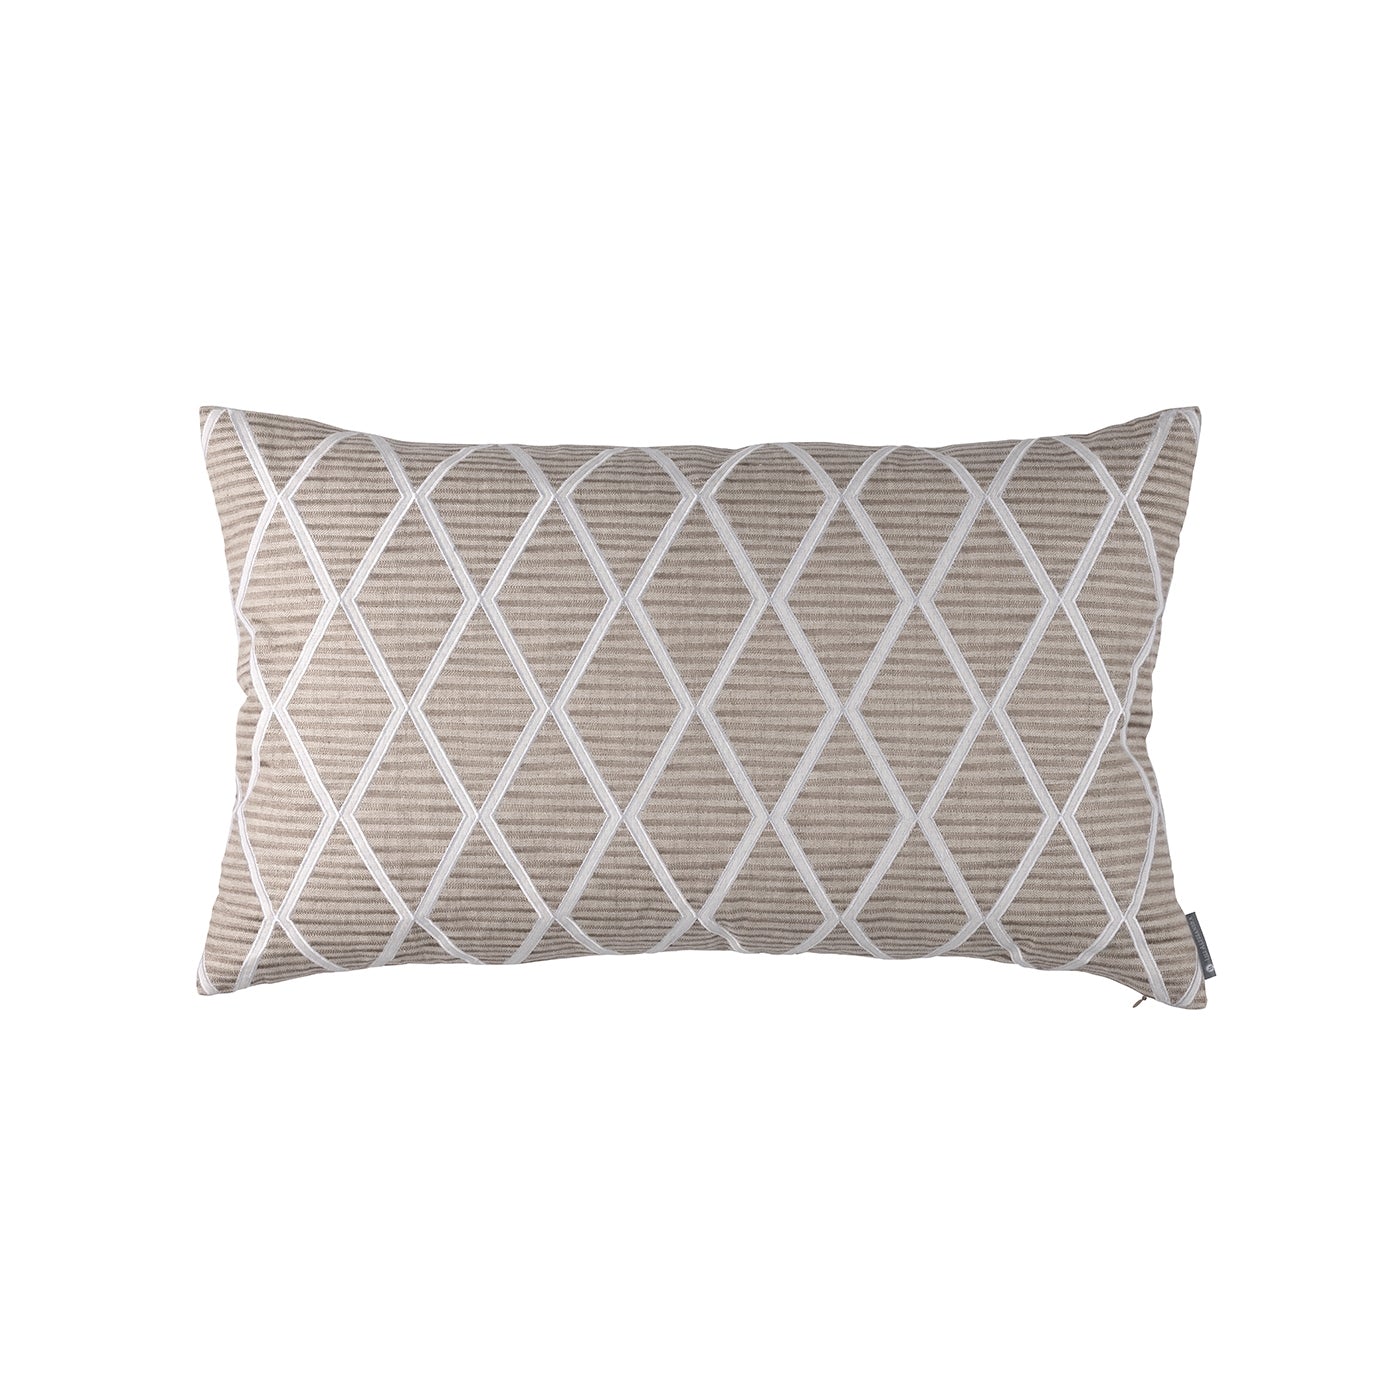 Brook Large Dark Natural & White Pillows by Lili Alessandra | Fig Linens